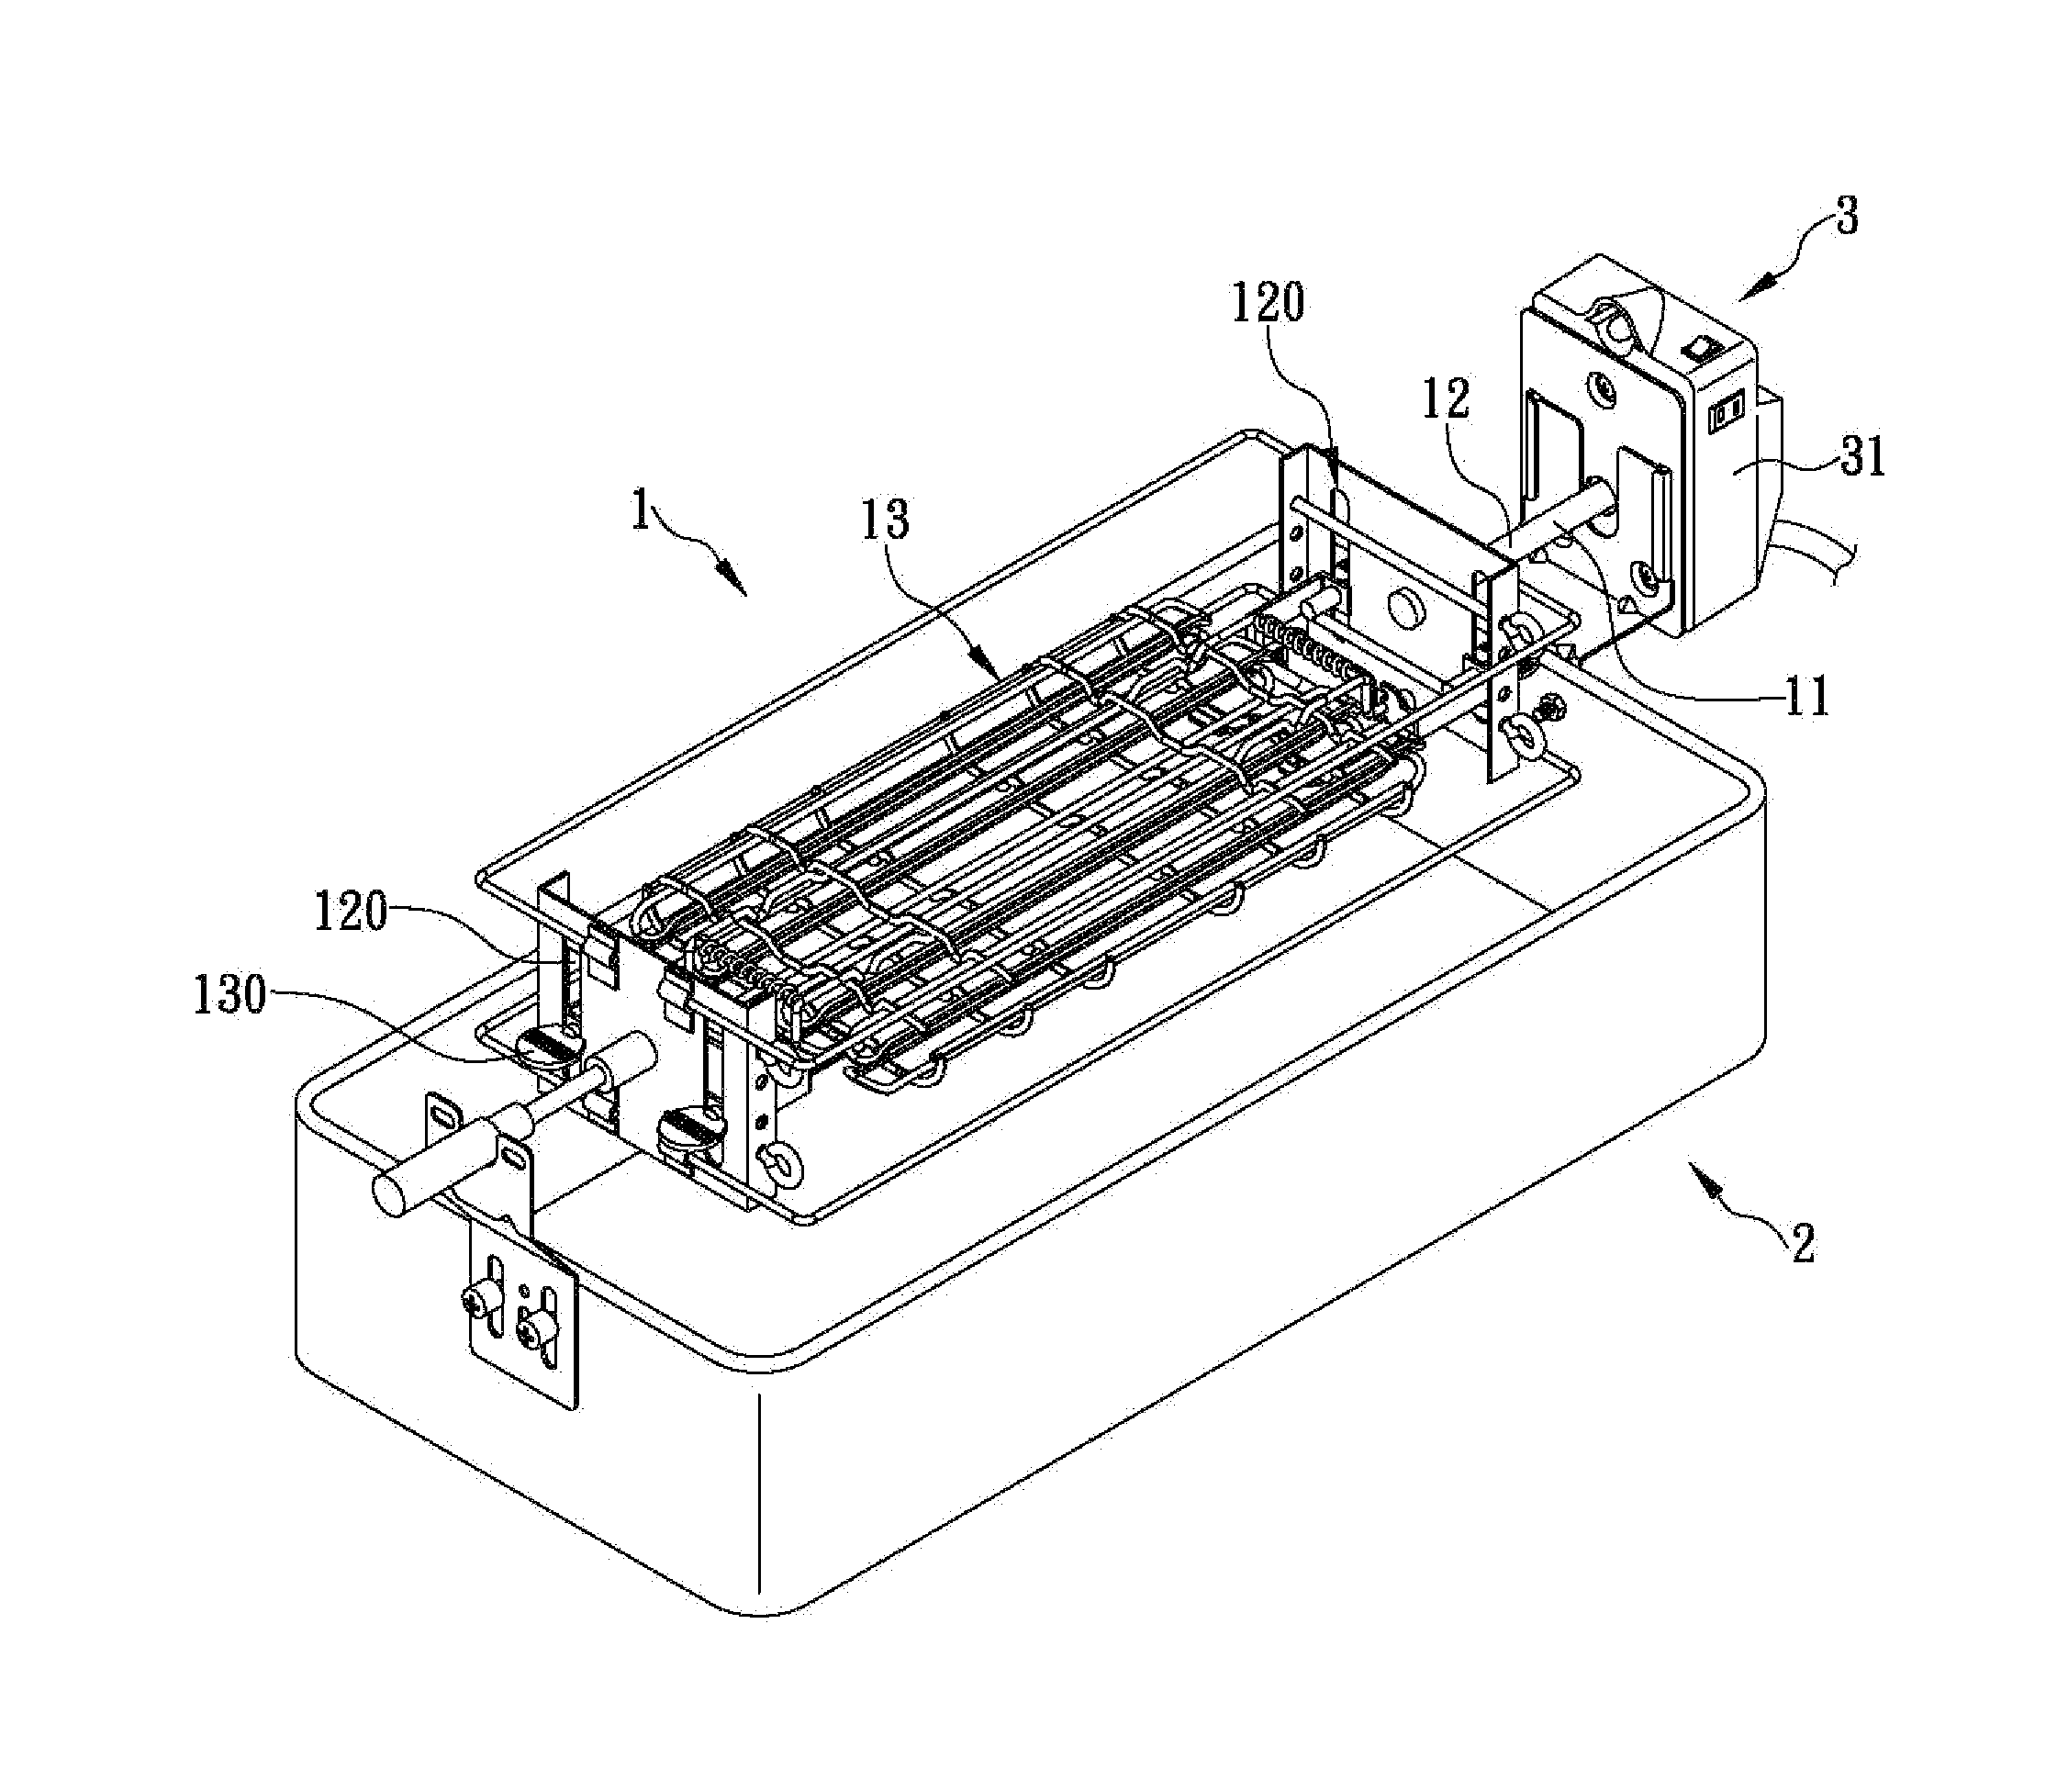 Power module capable of intermittently rotating grill rack